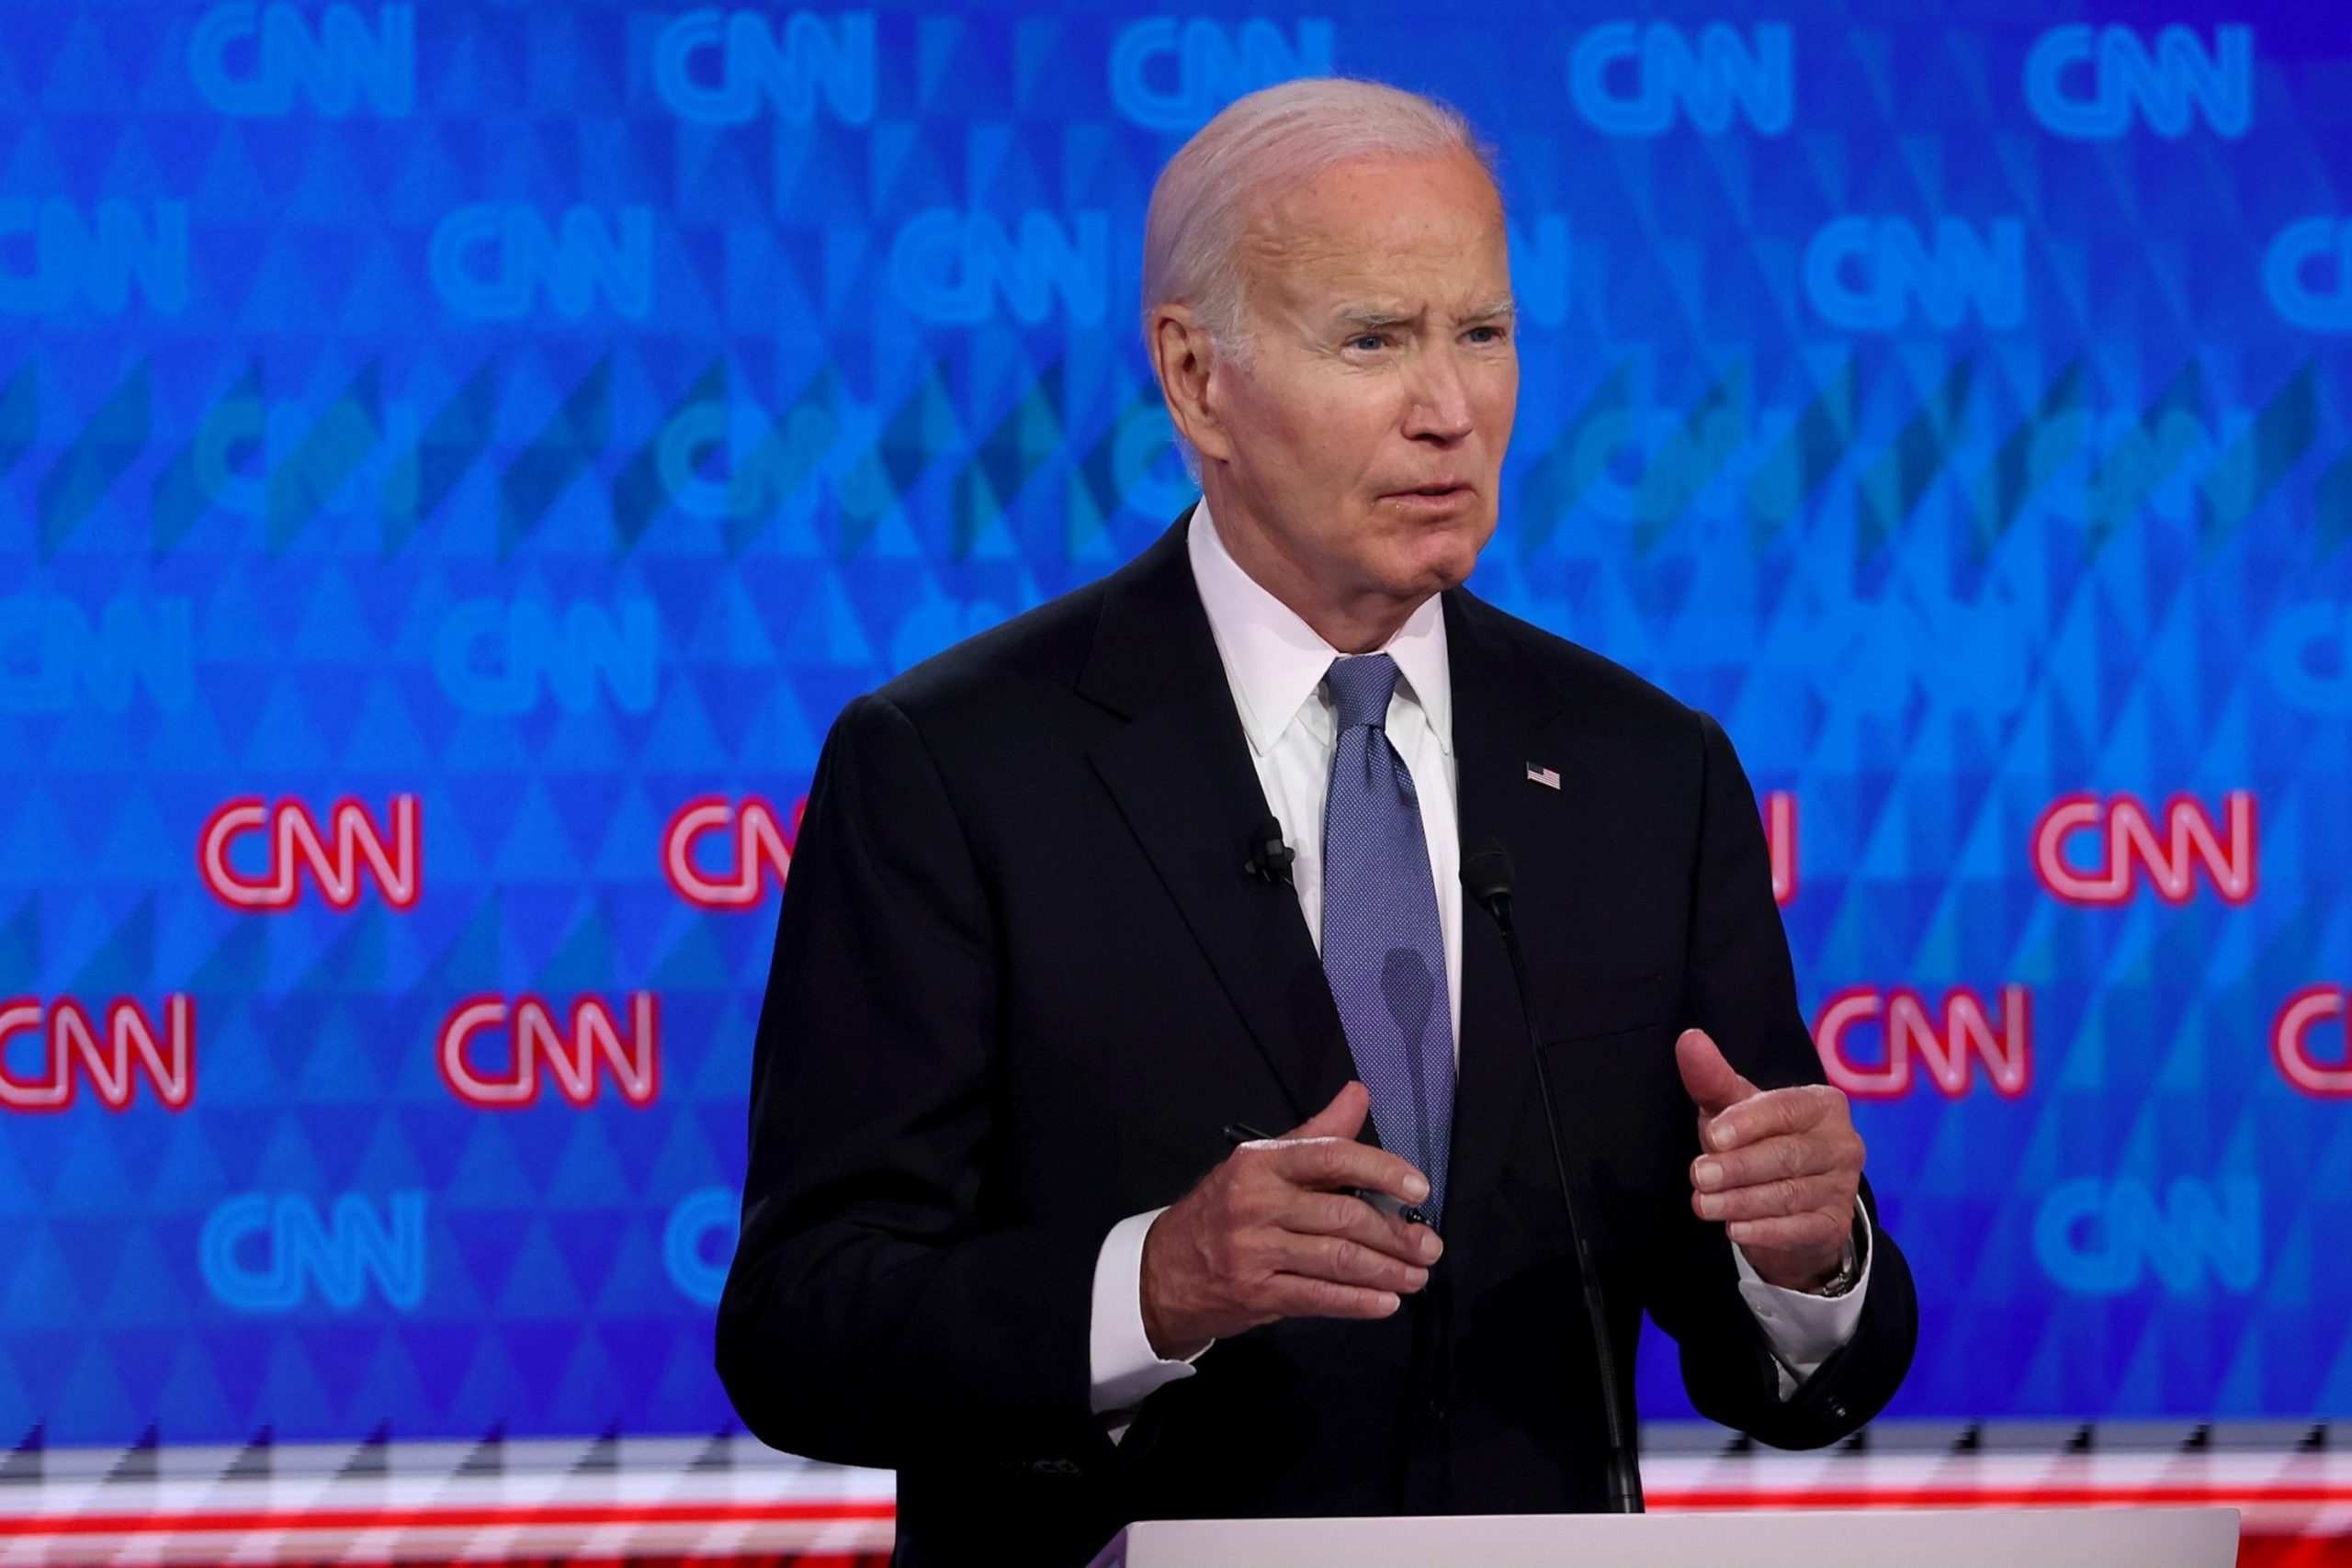 Is it possible for Biden to recover from a challenging debate performance?